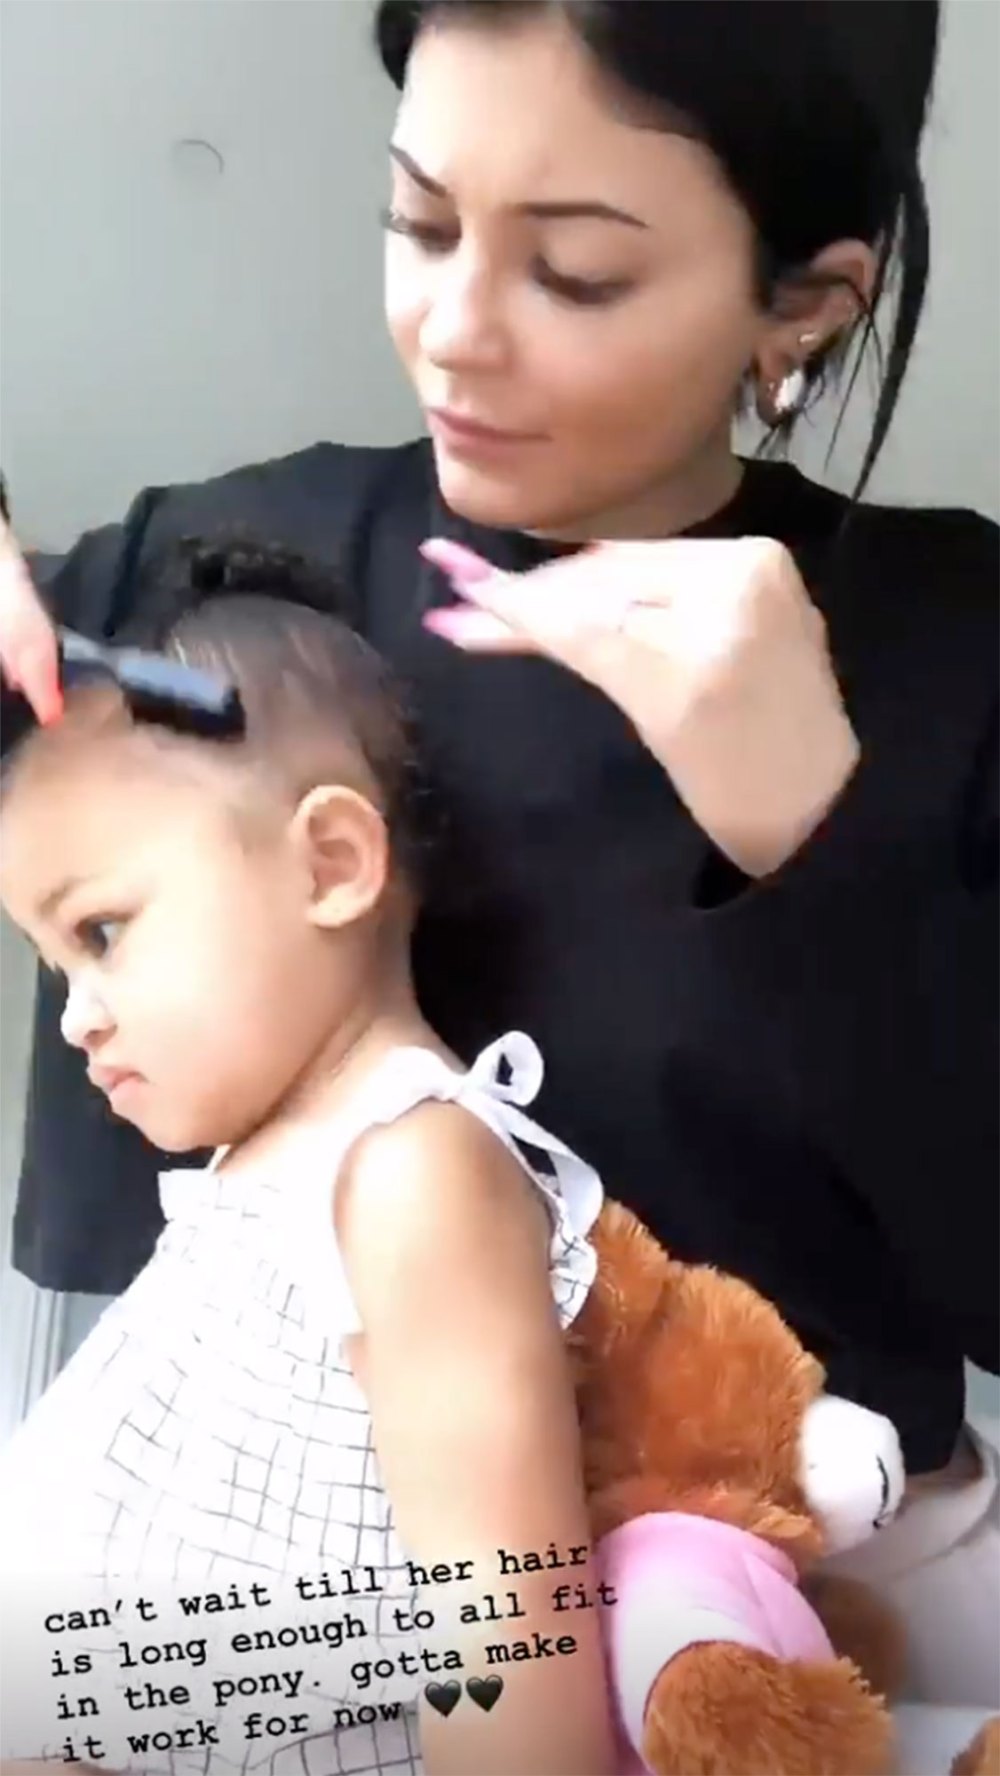 Kylie Jenner Shows Off Her Hairstyling Skills on Daughter Stormi